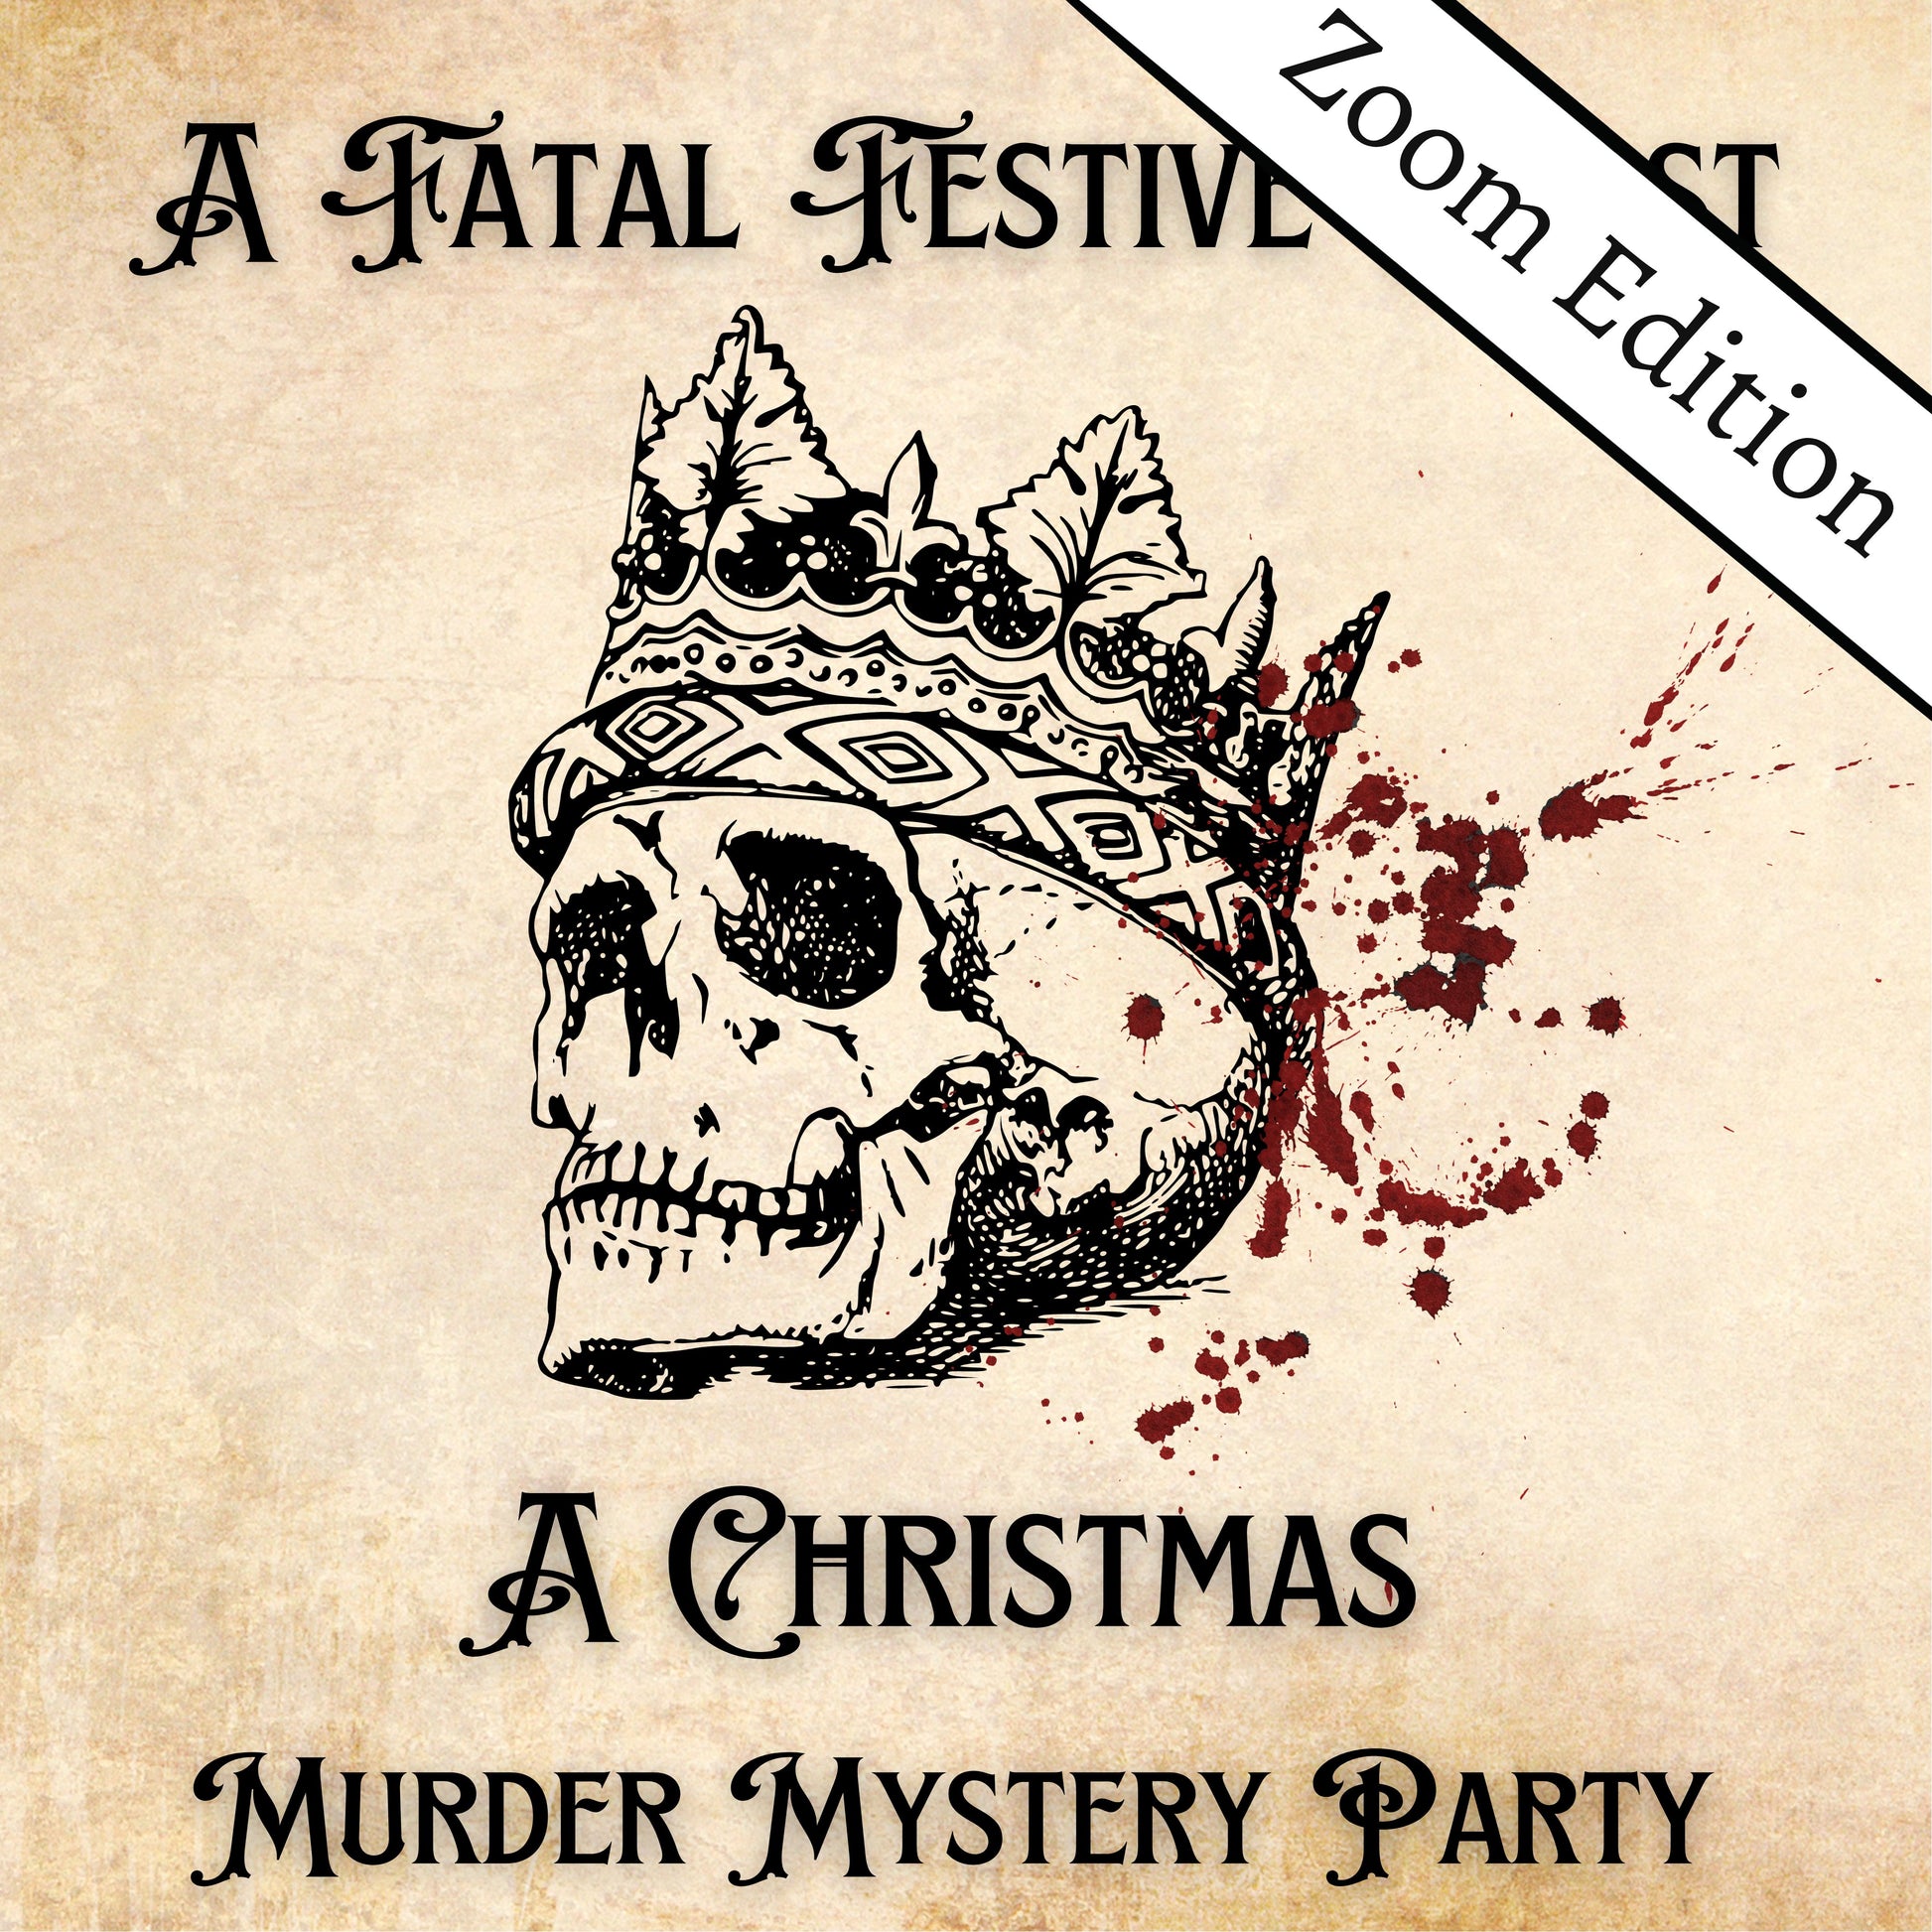 Fun and colourful fully scripted Royal christmas themed murder mystery party game for 5-10 players zoom edition